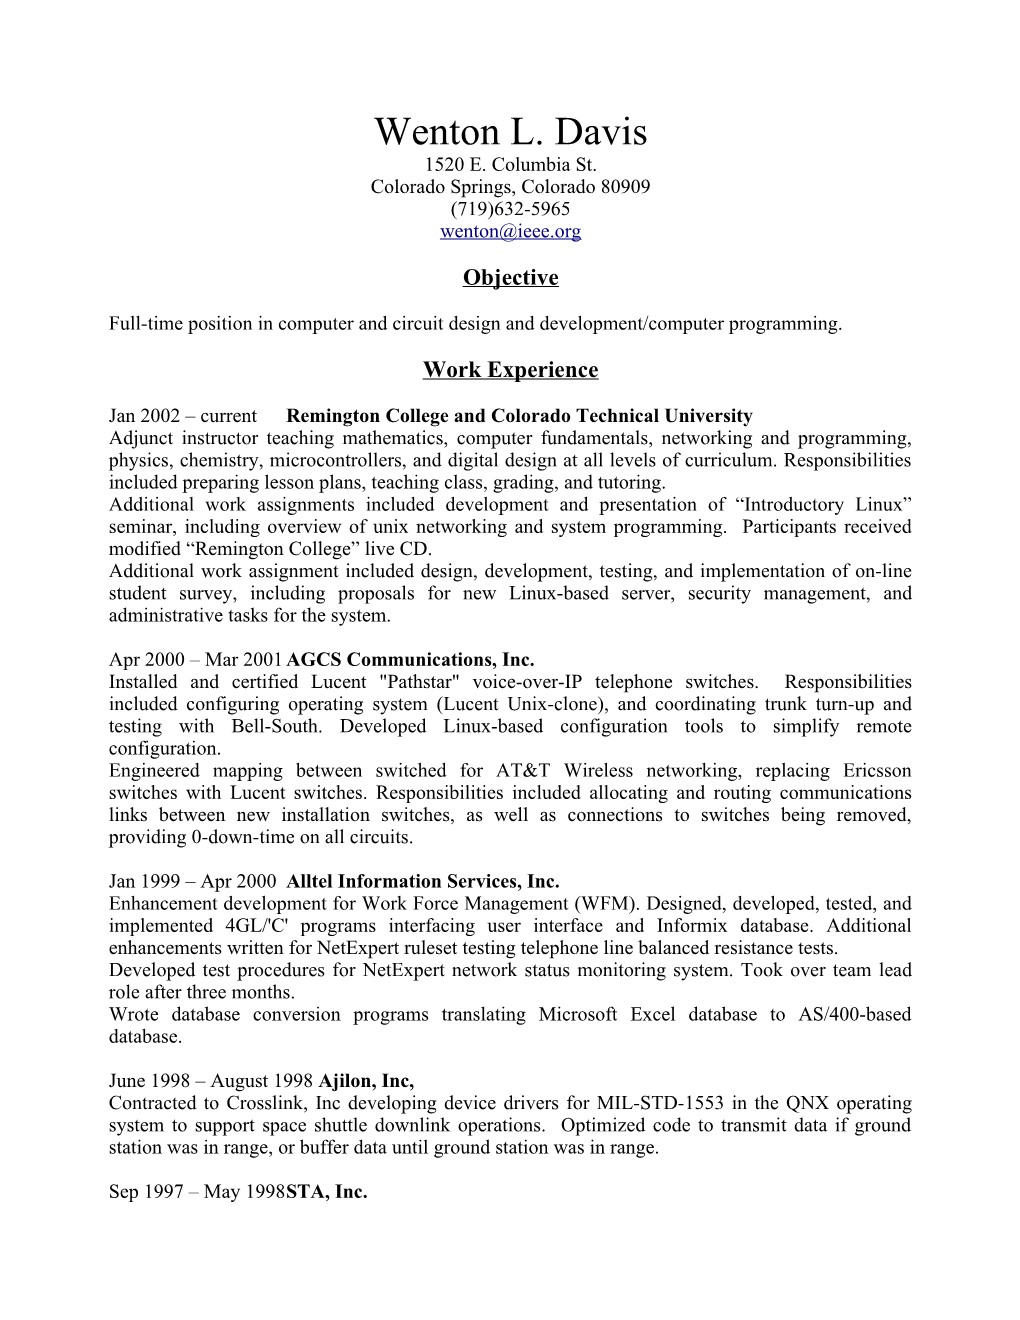 Full-Time Position in Computer and Circuit Design and Development/Computer Programming